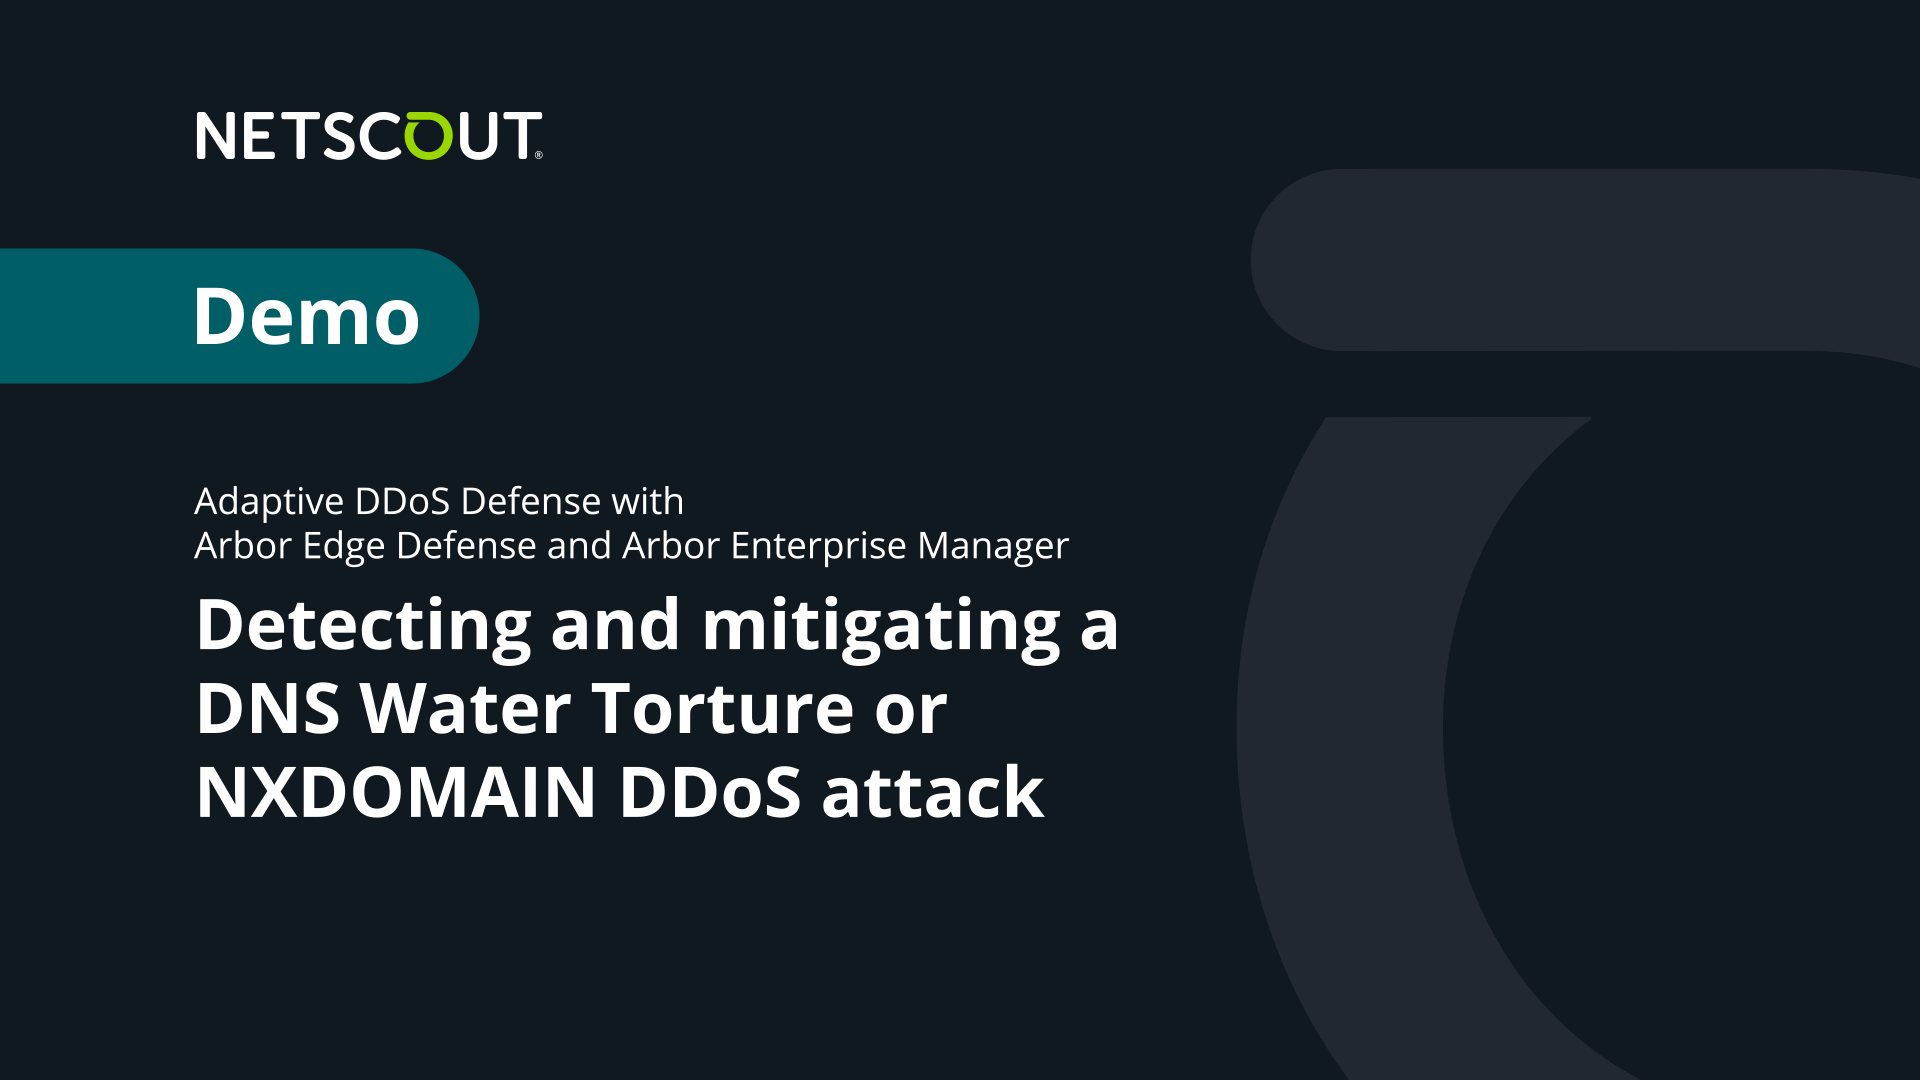 Detecting and Mitigating DNS Water Torture or NXDOMAIN DDoS Attacks